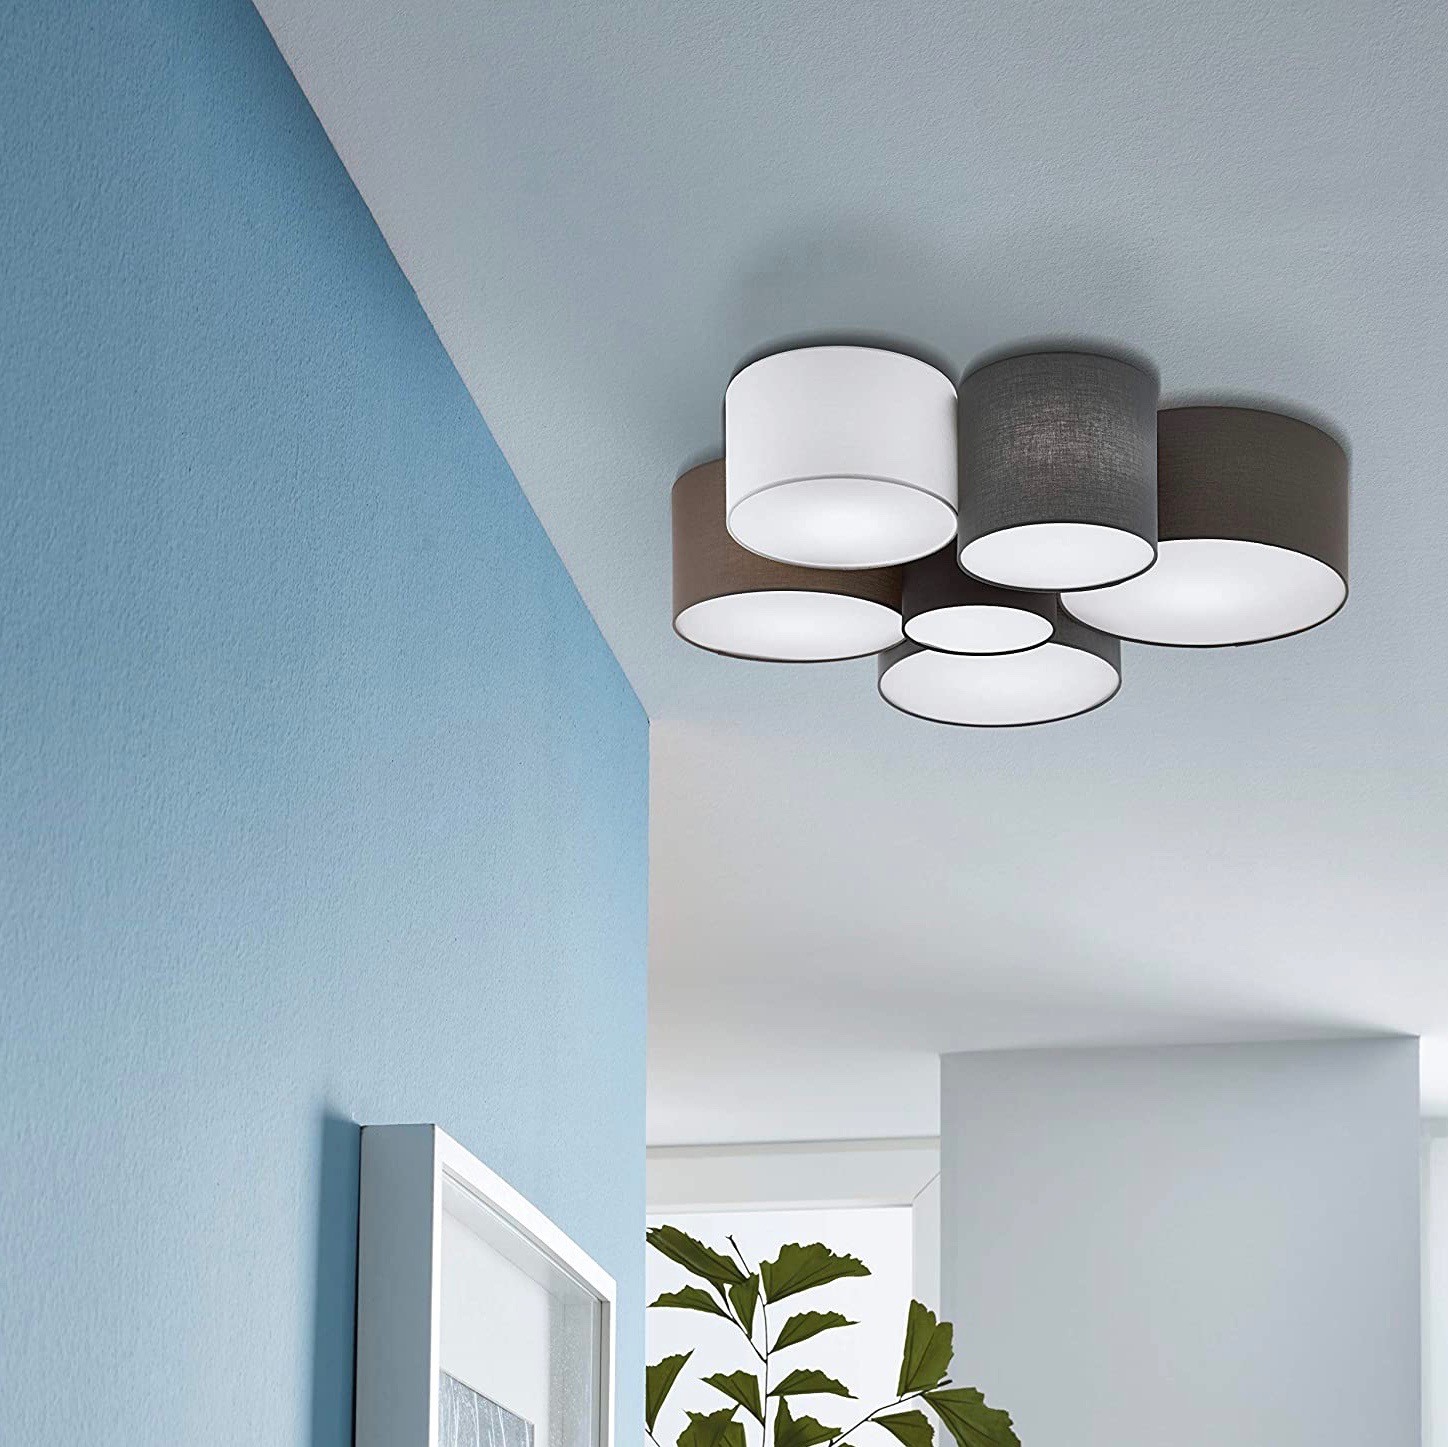 311,95 € Free Shipping | Ceiling lamp Eglo 99×99 cm. 6 spotlights Steel and textile